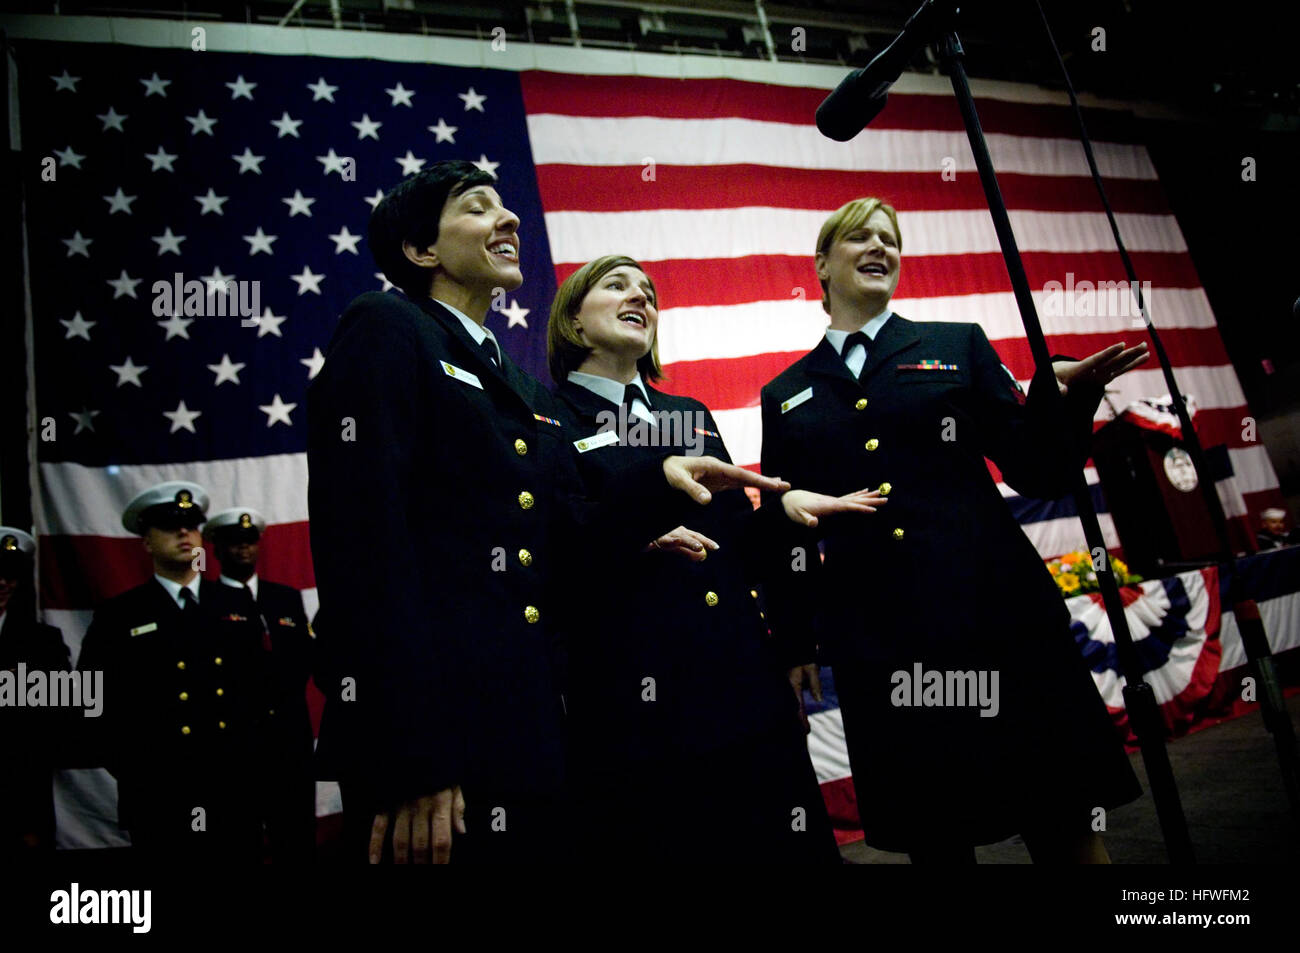 081012-N-5549O-100 NEW YORK (Oct. 12, 2008) The United States Navy Band 'Sea Chanters' sing to a crowd of guests aboard the amphibious assault ship USS Nassau (LHA 4) during a celebration ceremony of the 100th anniversary of the Great White Fleet.  (U.S. Navy photo by Mass Communication Specialist 2nd Class Kevin S. O'Brien/Released) US Navy 081012-N-5549O-100 The United States Navy Band Stock Photo